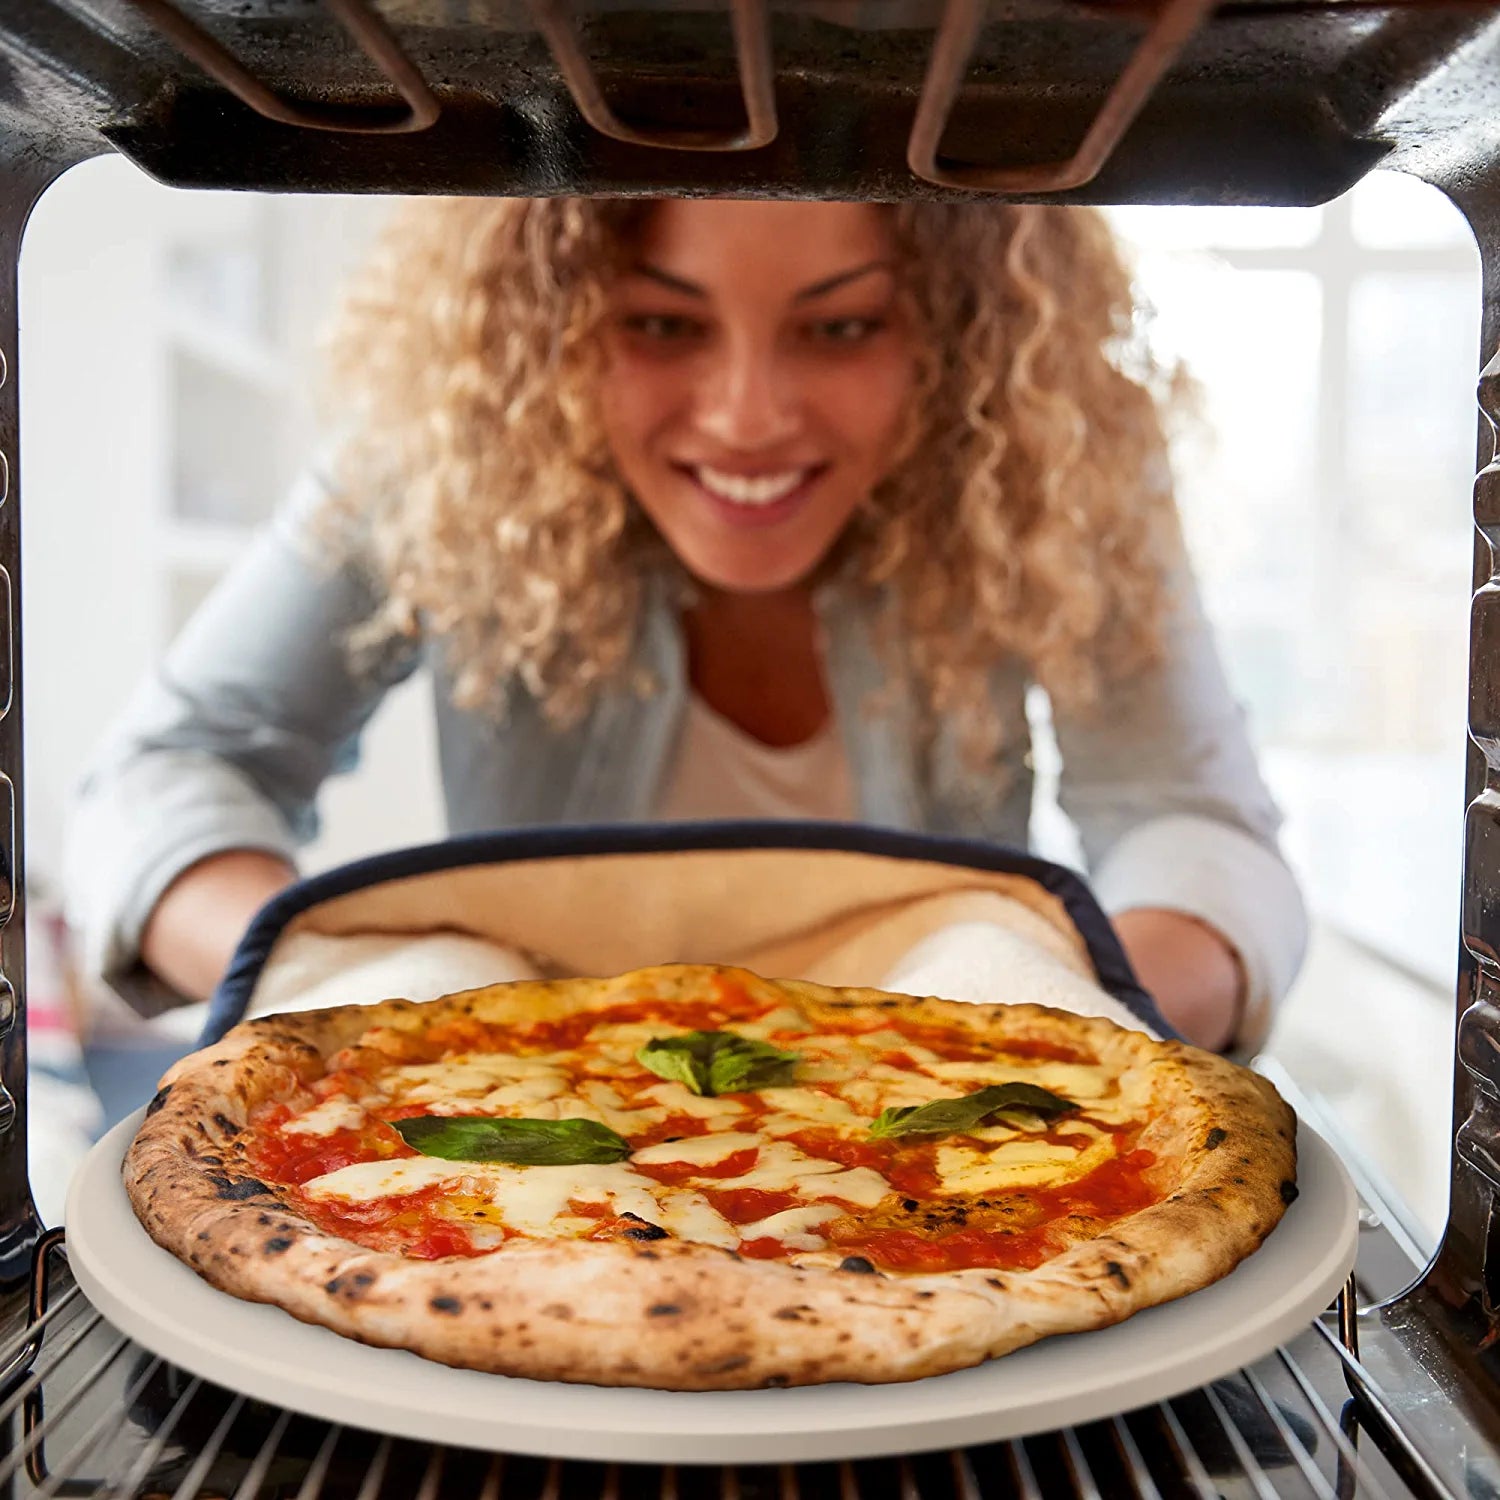 Pizza Stone for Oven and Grill 14 inch - Cordierite Baking Stone Set with Stainless Steel Rack and Plastic Scraper - Durable and High-Quality Ceramic Pizza Stones for Grill and Oven